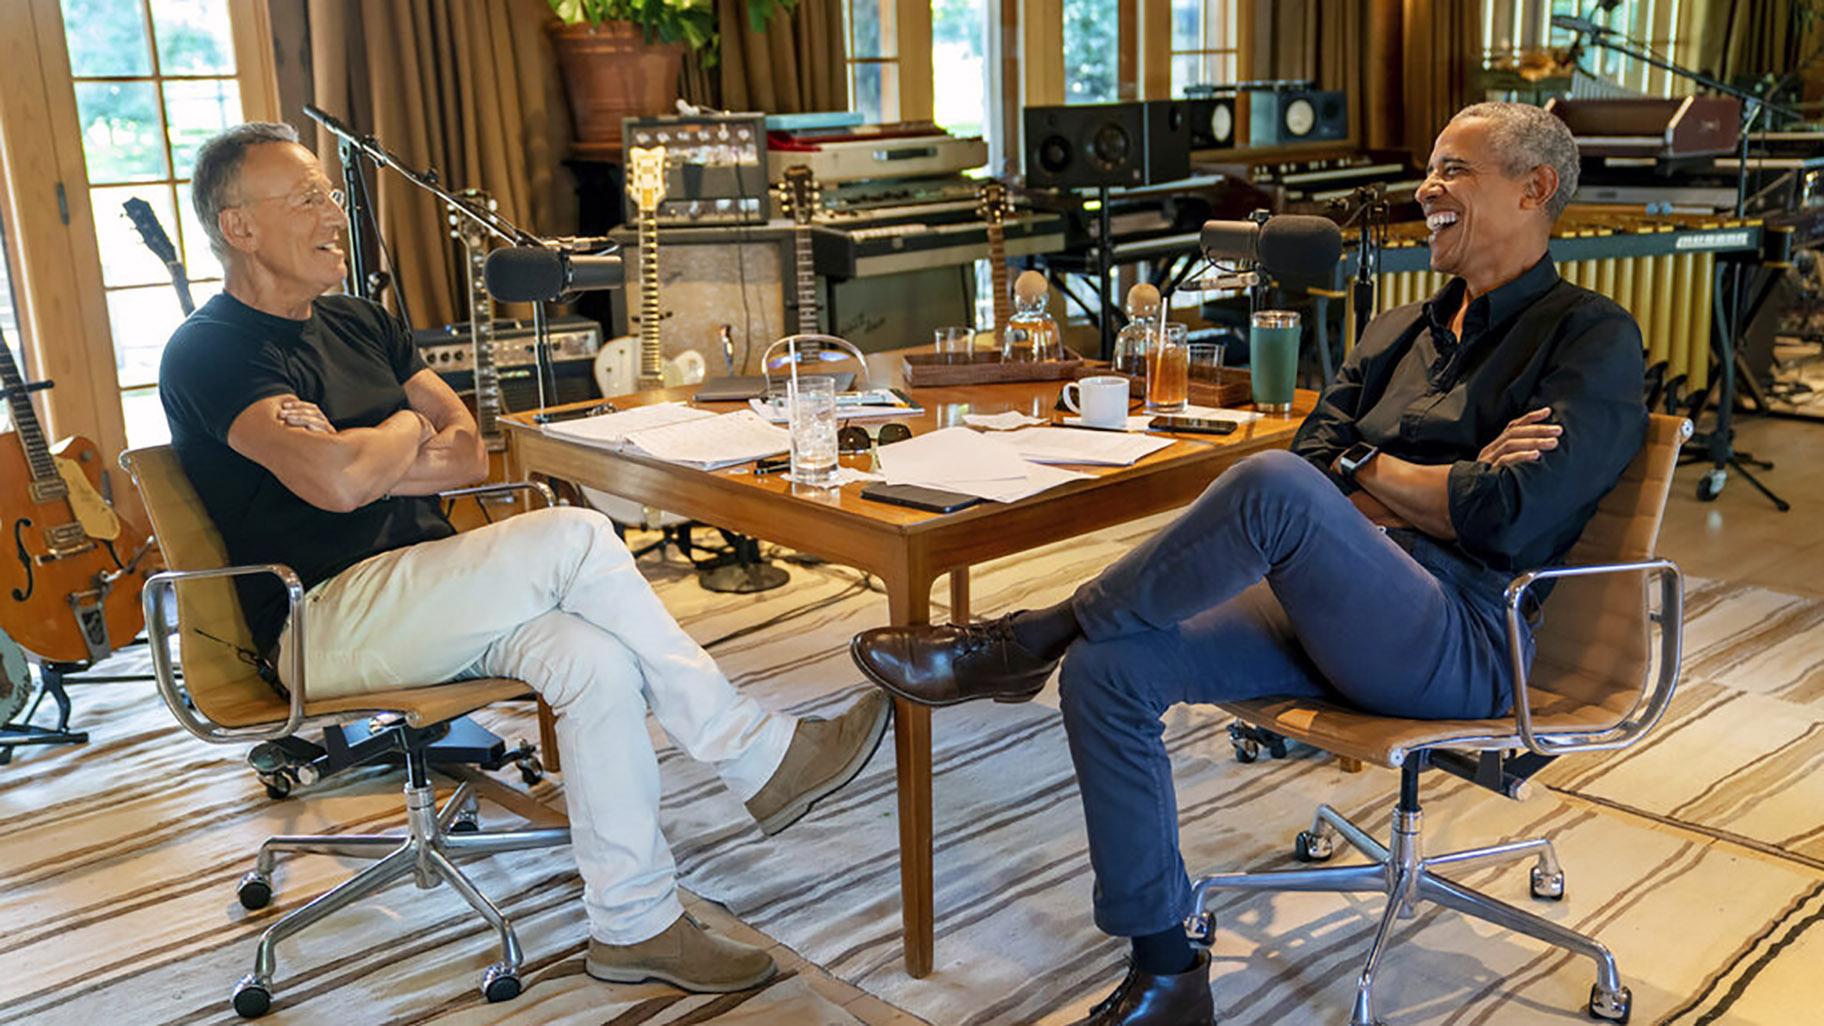 Bruce Springsteen, left, appears with former President Barack Obama during their podcast of conversations recorded at Springsteen's home studio in New Jersey. The eight-episode series covers their upbringings, racism, fatherhood and even recall a White House singalong around a piano. (Rob DeMartin / Spotify via AP)